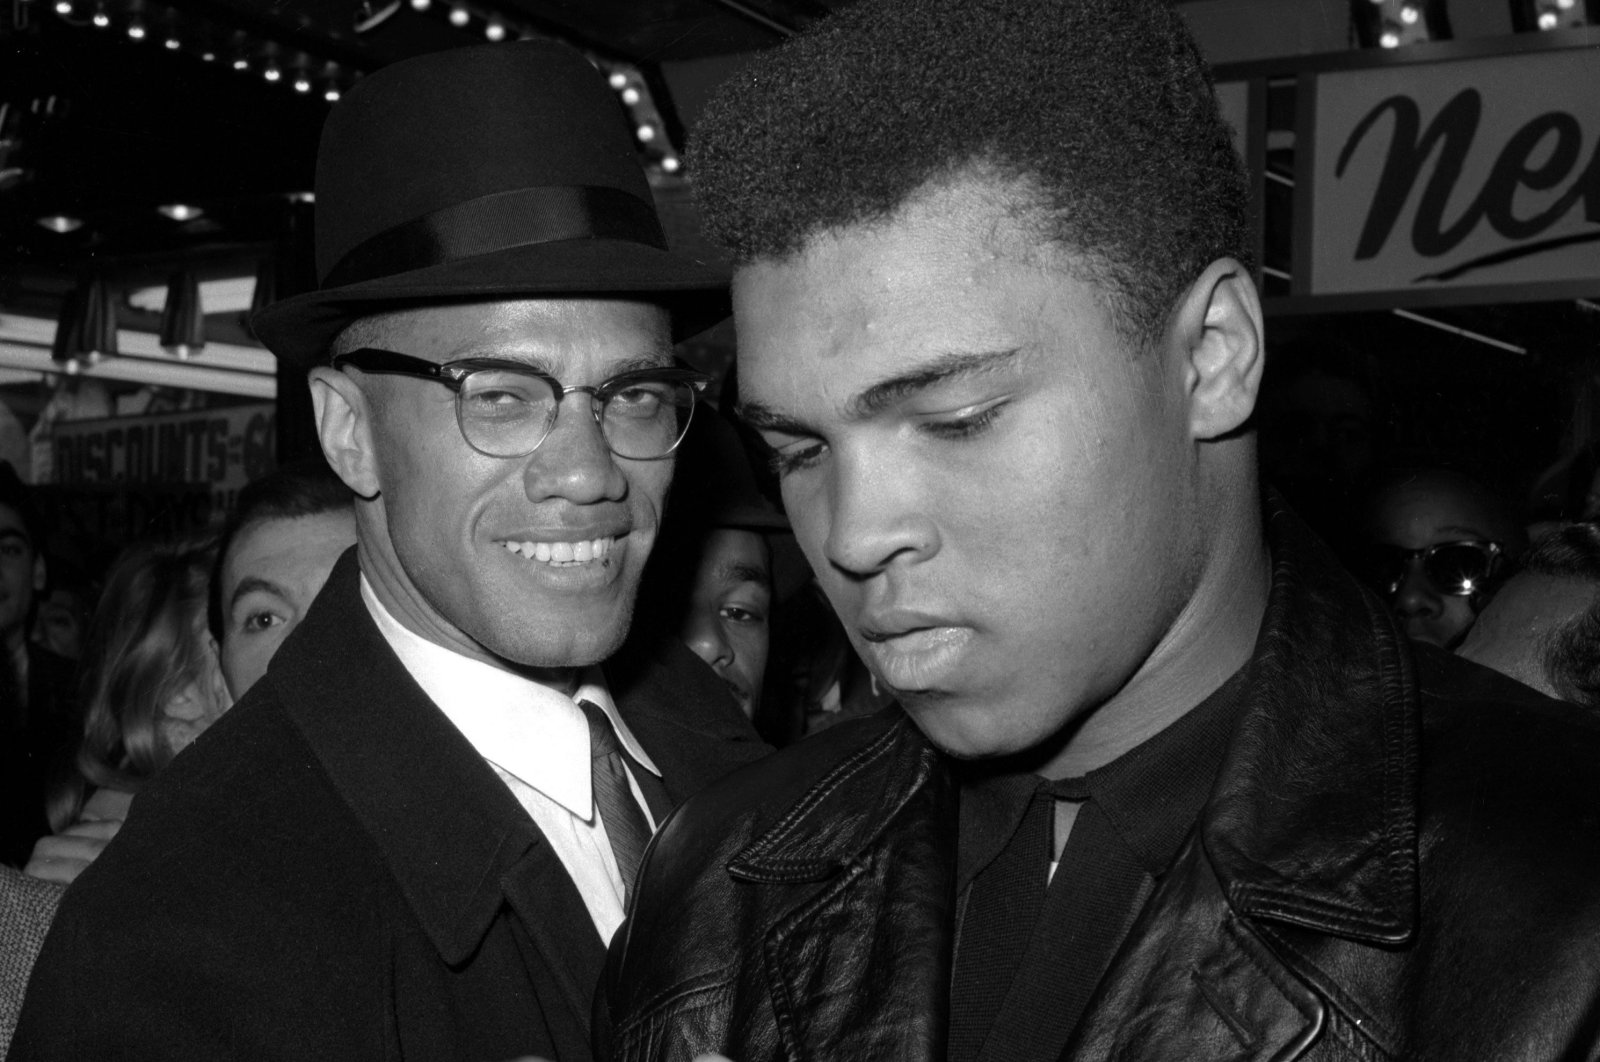 World heavyweight boxing champion Muhammad Ali (R) poses with the black Muslim leader Malcolm X, outside the Trans-Lux Newsreel Theater after watching a screening of films on Ali&#039;s title fight with Sonny Liston in Miami Beach, New York City, U.S., March 1, 1964. (AP Photo)